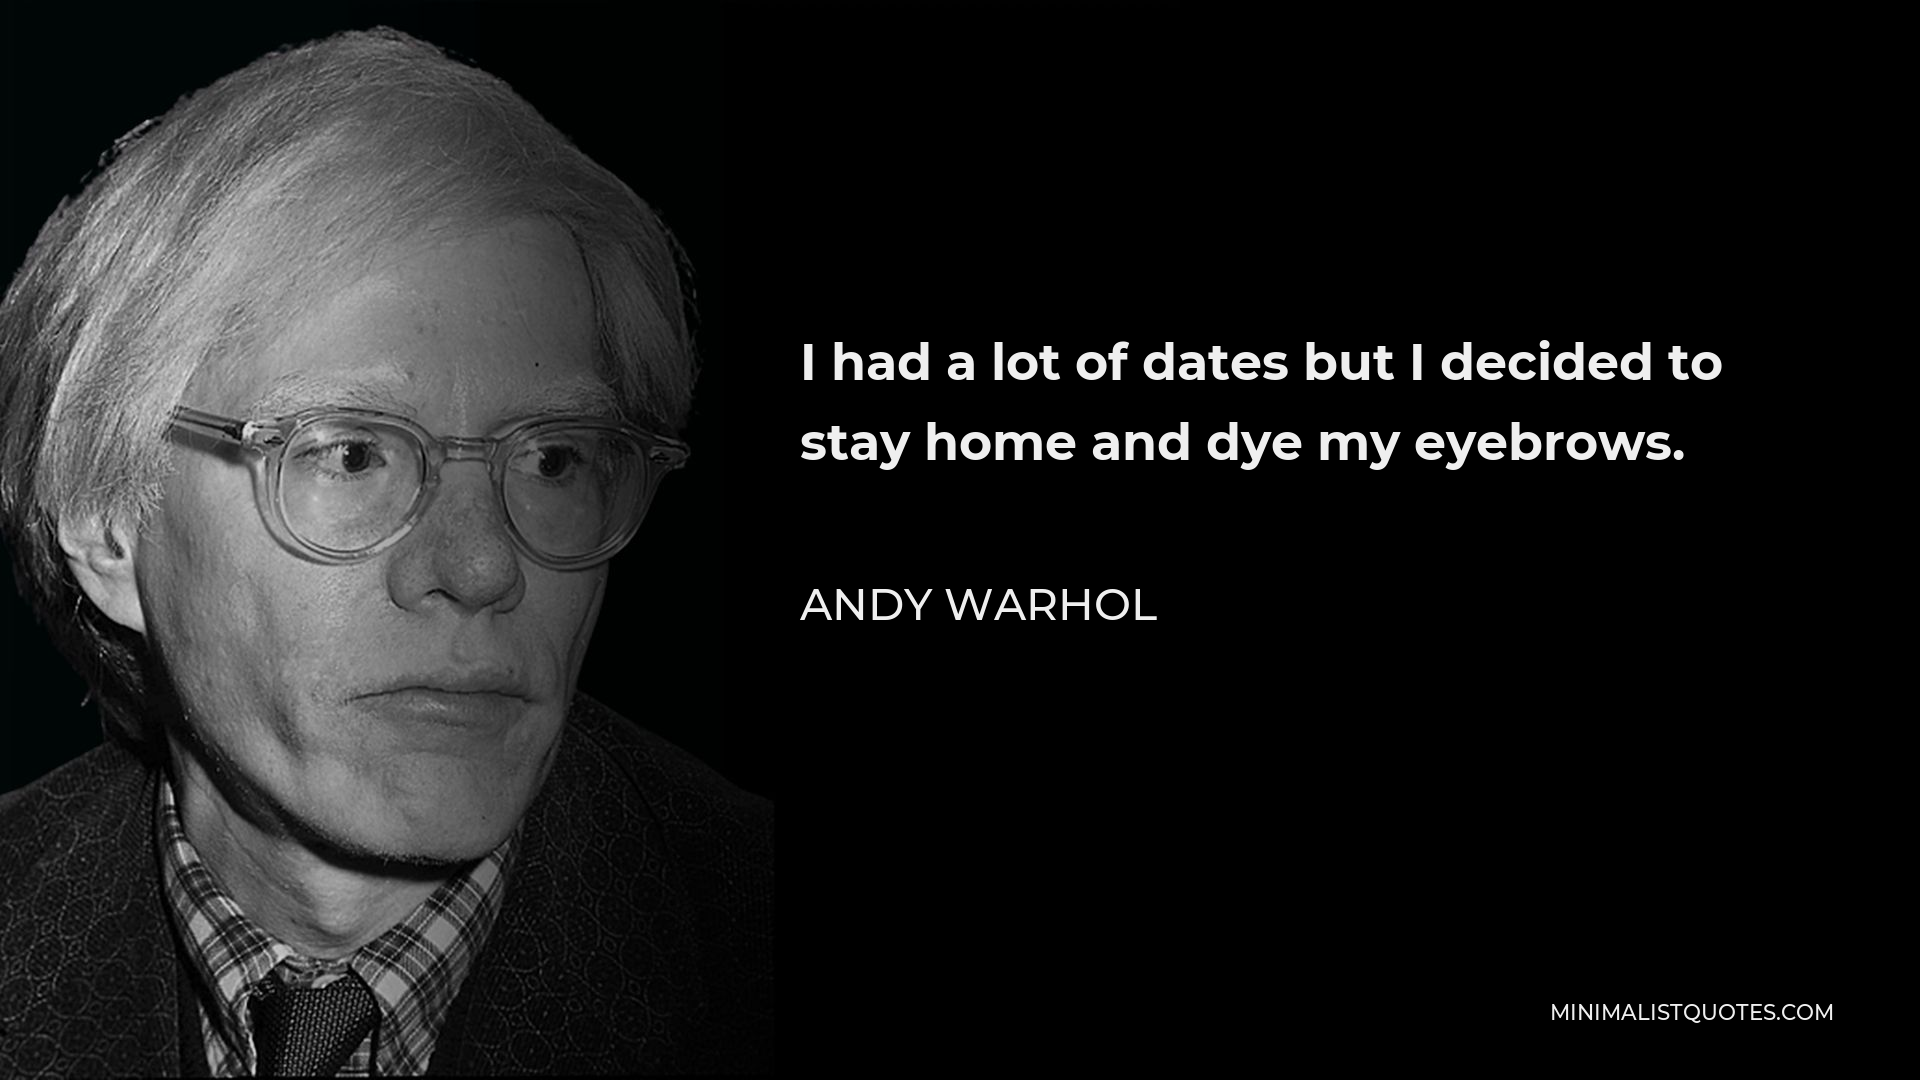 Andy Warhol Quote - I had a lot of dates but I decided to stay home and dye my eyebrows.